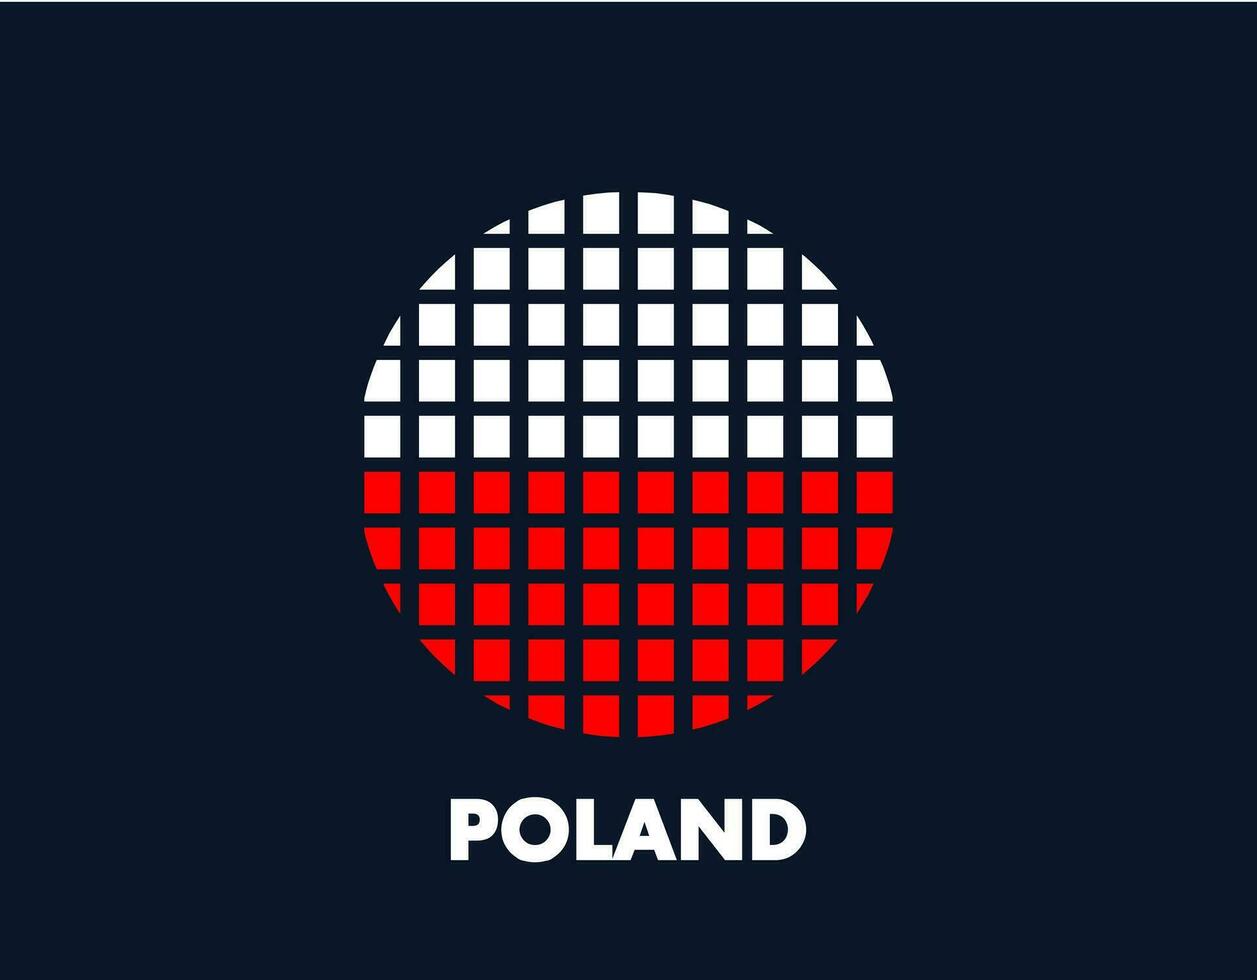 The Poland round flag icon. Design flag with the arrangement of squares that form a circle. Flag with white and red. vector